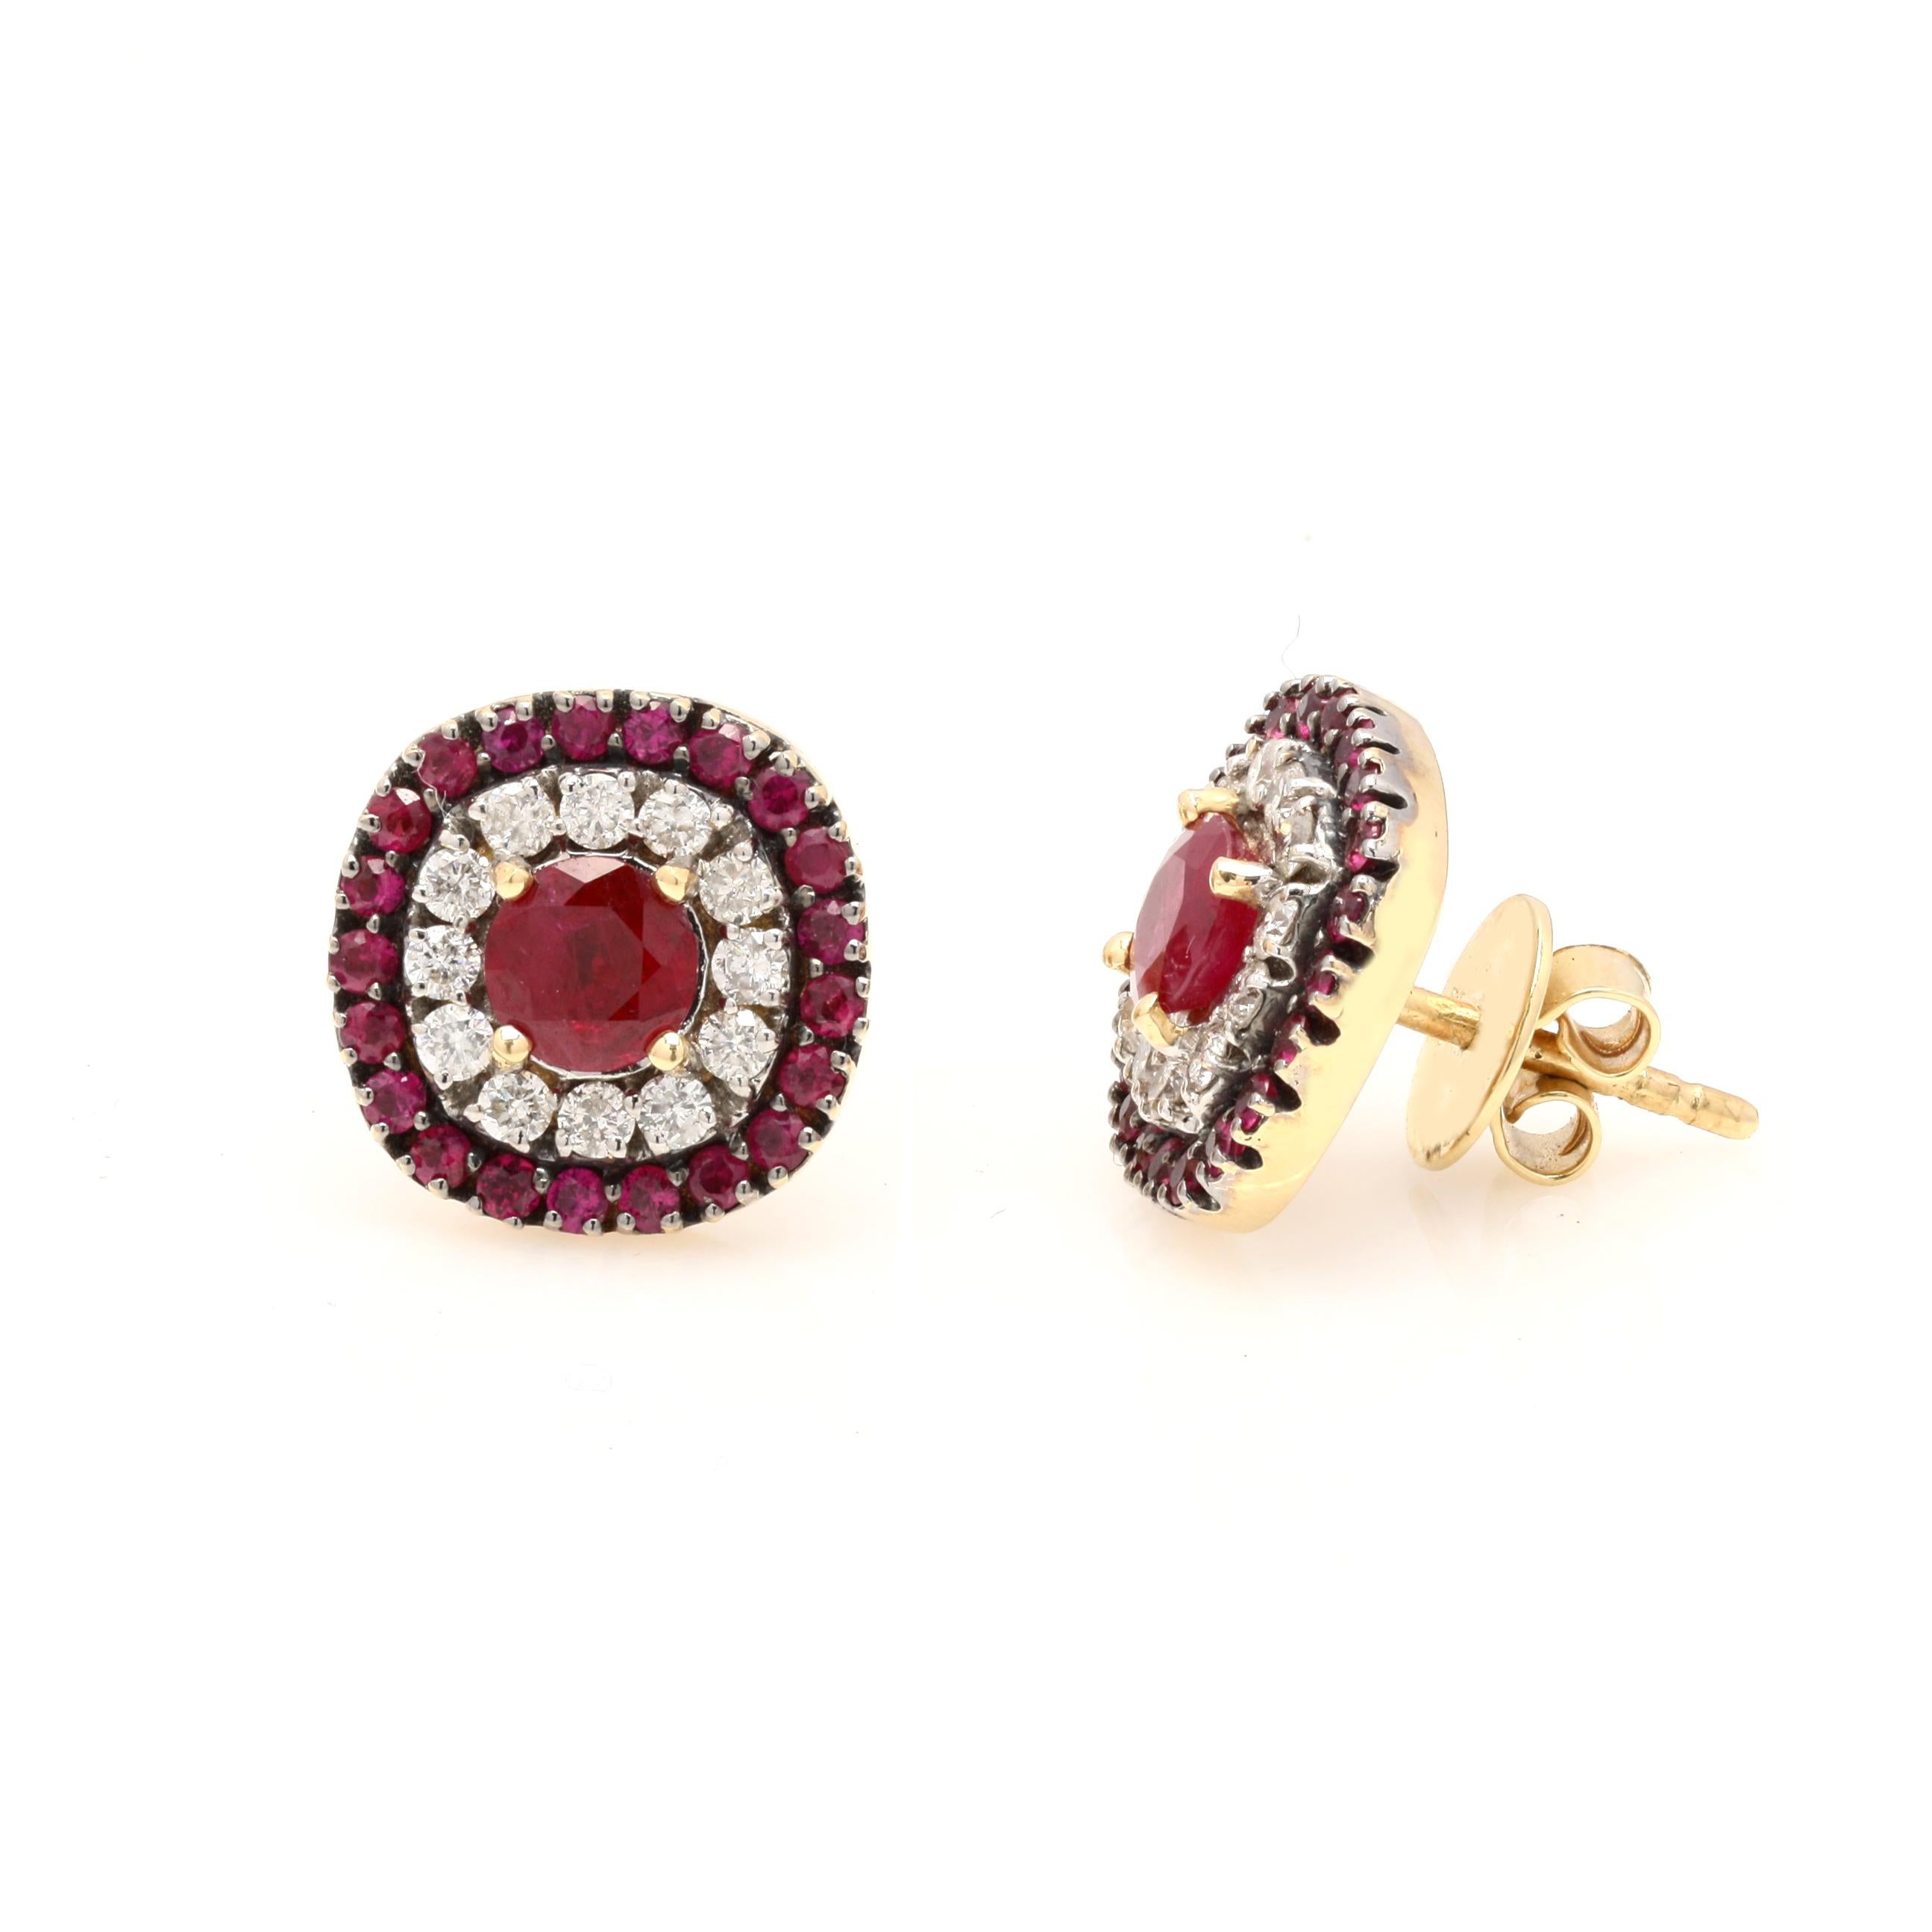 Round Cut Ruby and Diamond Wedding Earrings in 18K Gold. Embrace your look with these stunning pair of earrings suitable for any occasion to complete your outfit.
Earrings create a subtle beauty while showcasing the colors of the natural precious